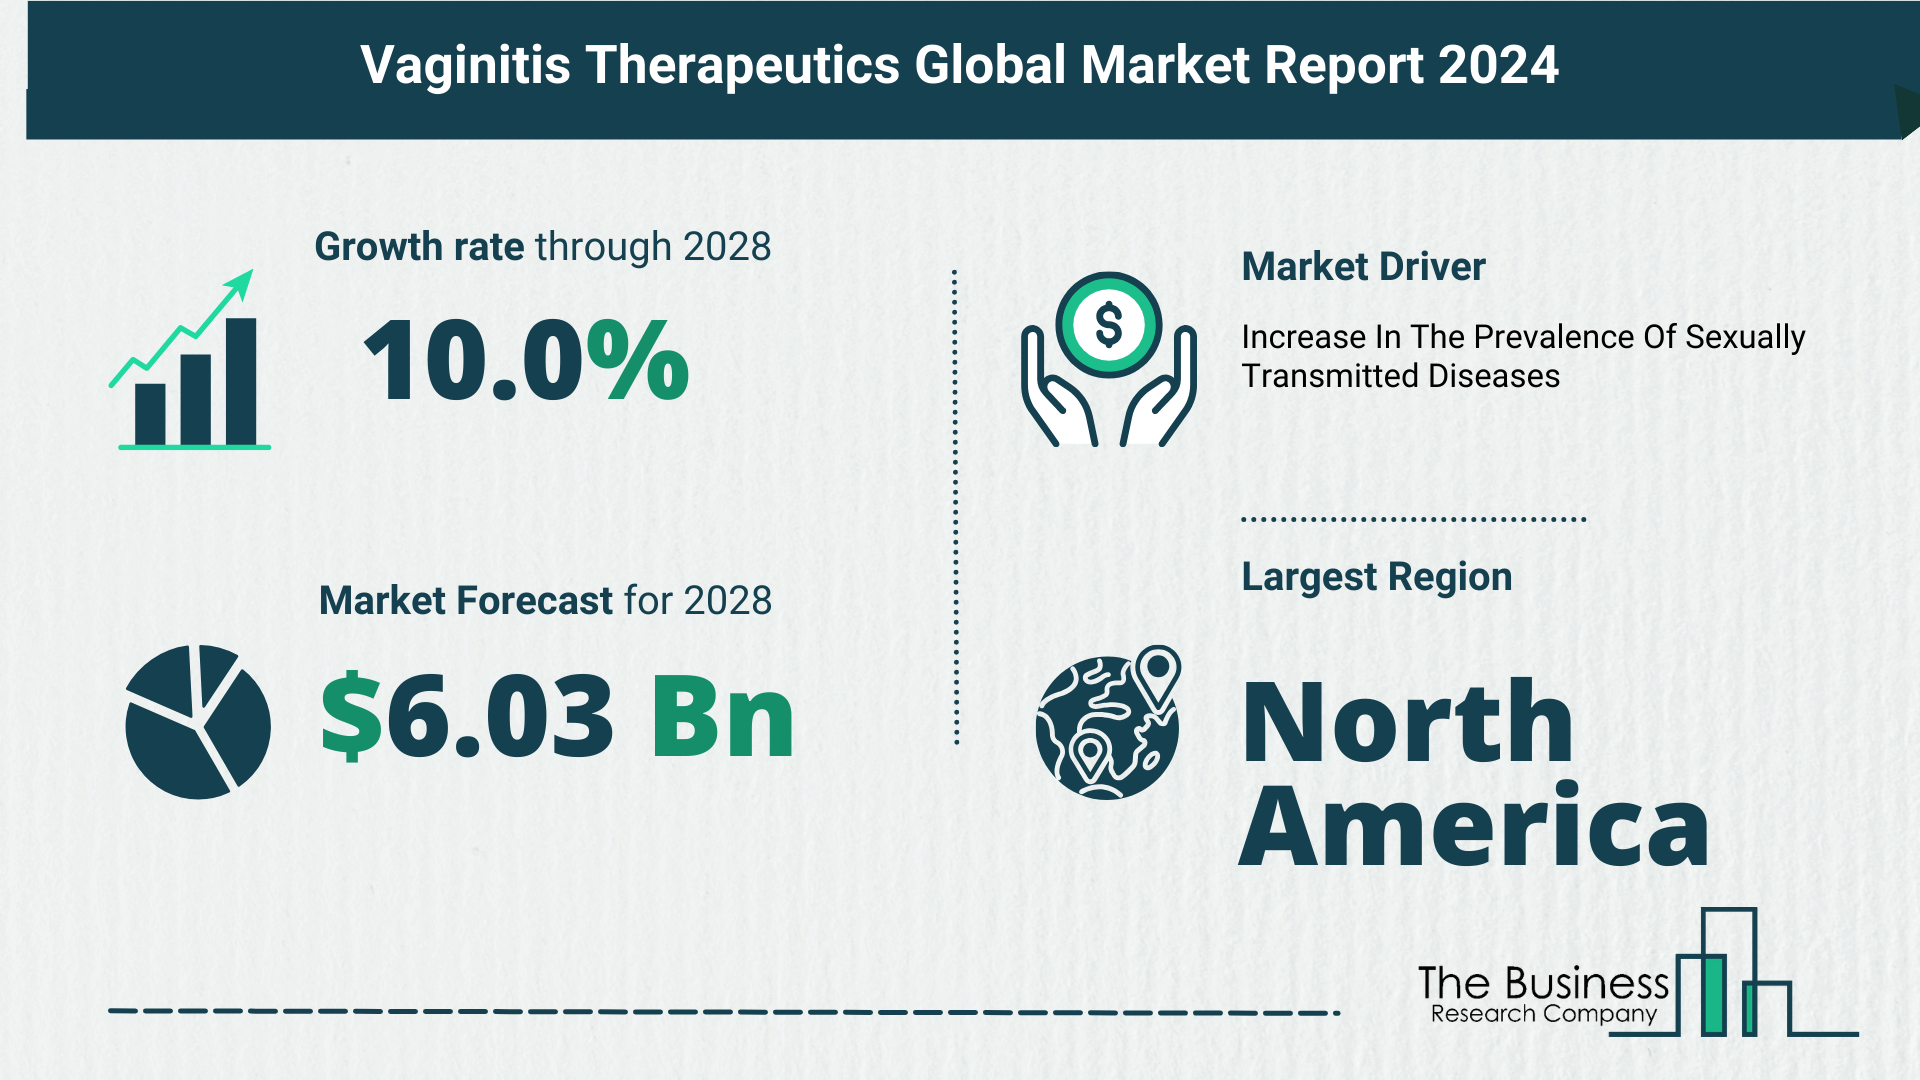 5 Takeaways From The Vaginitis Therapeutics Market Overview 2024